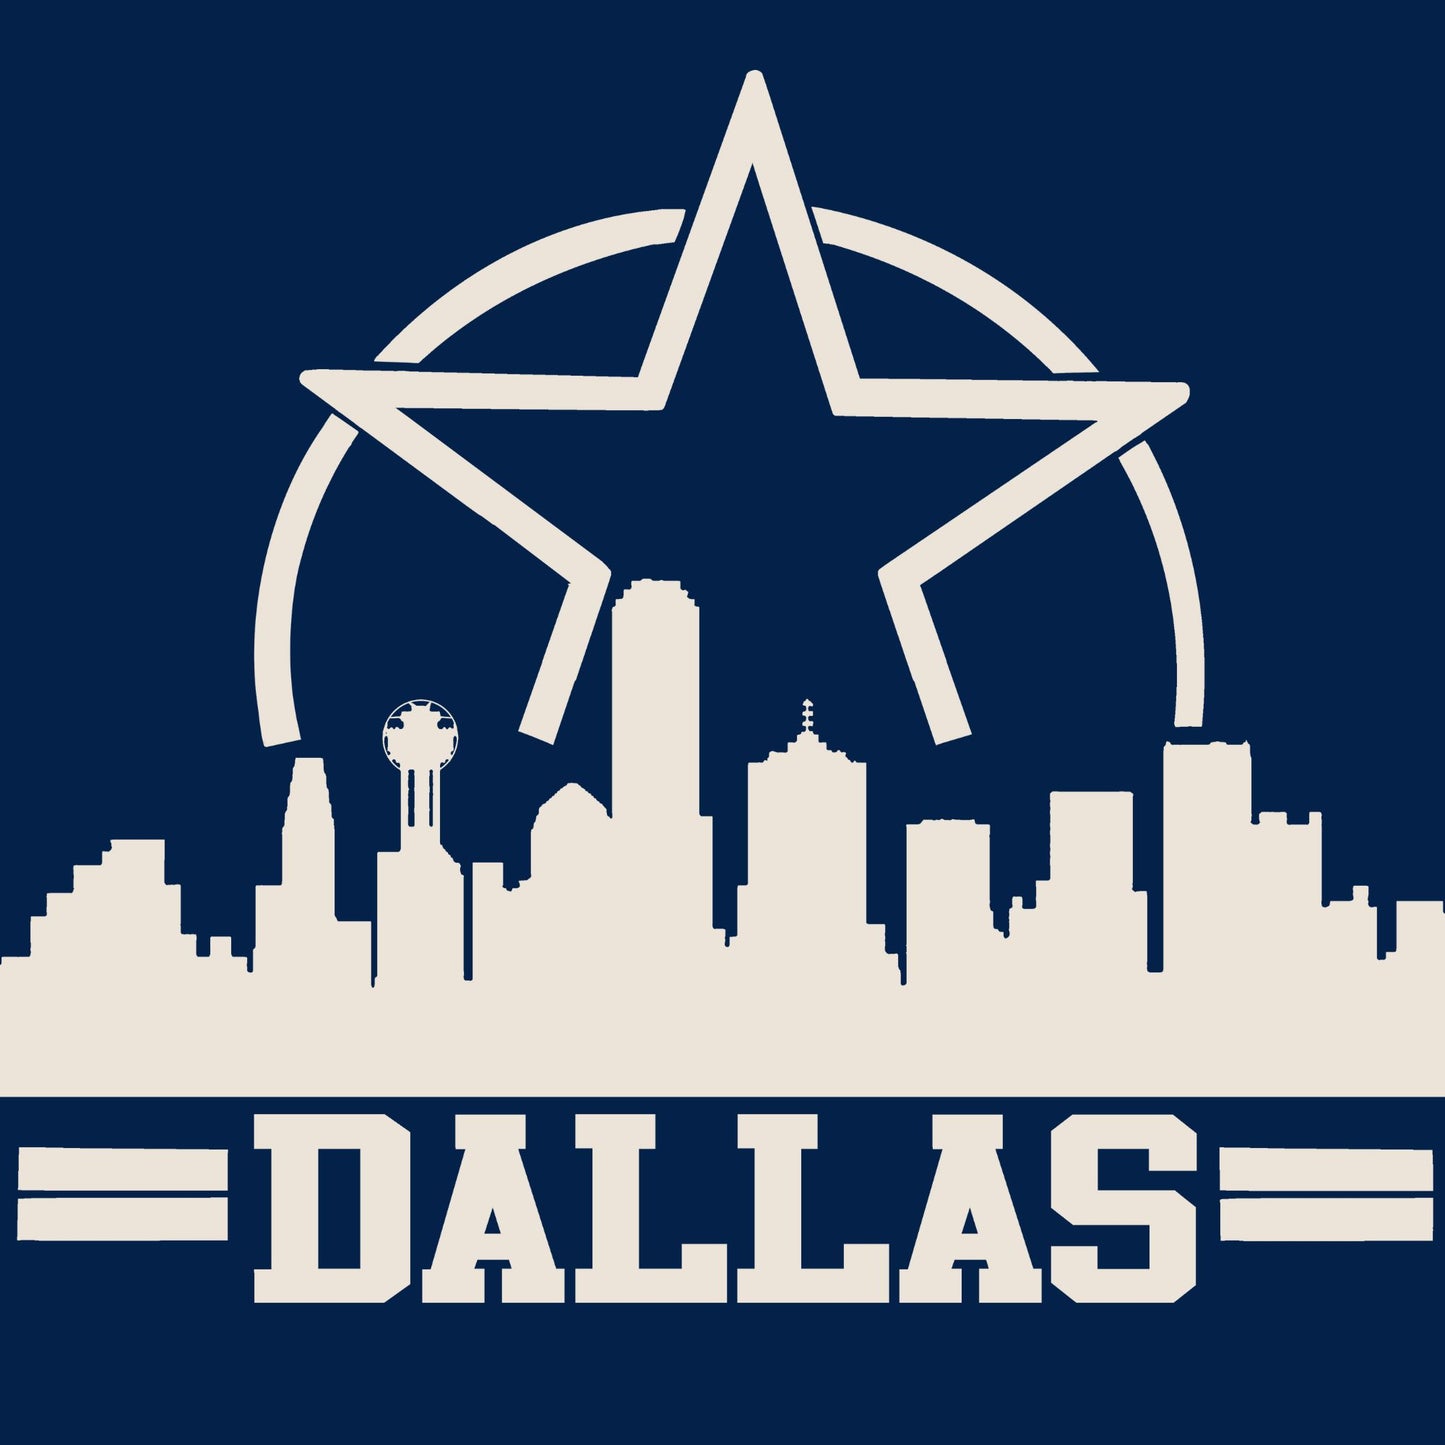 Dallas Downtown Blue Star T-Shirt: Showcase Your Urban Style with this Iconic Tee - Perfect Blend of Dallas Pride and City Vibes